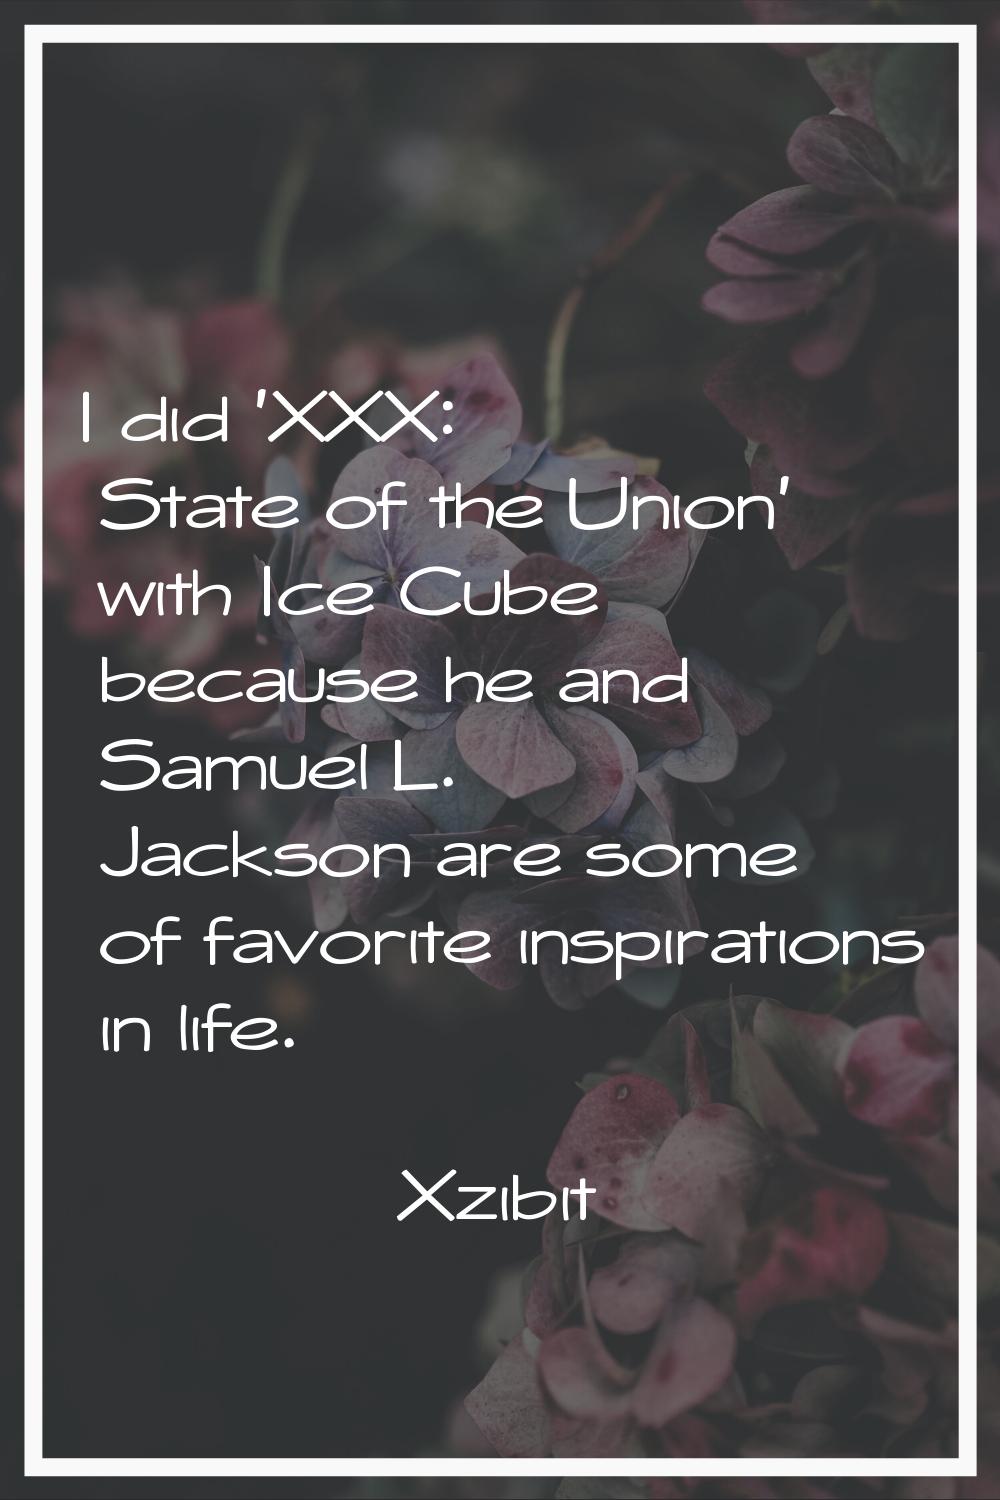 I did 'XXX: State of the Union' with Ice Cube because he and Samuel L. Jackson are some of favorite